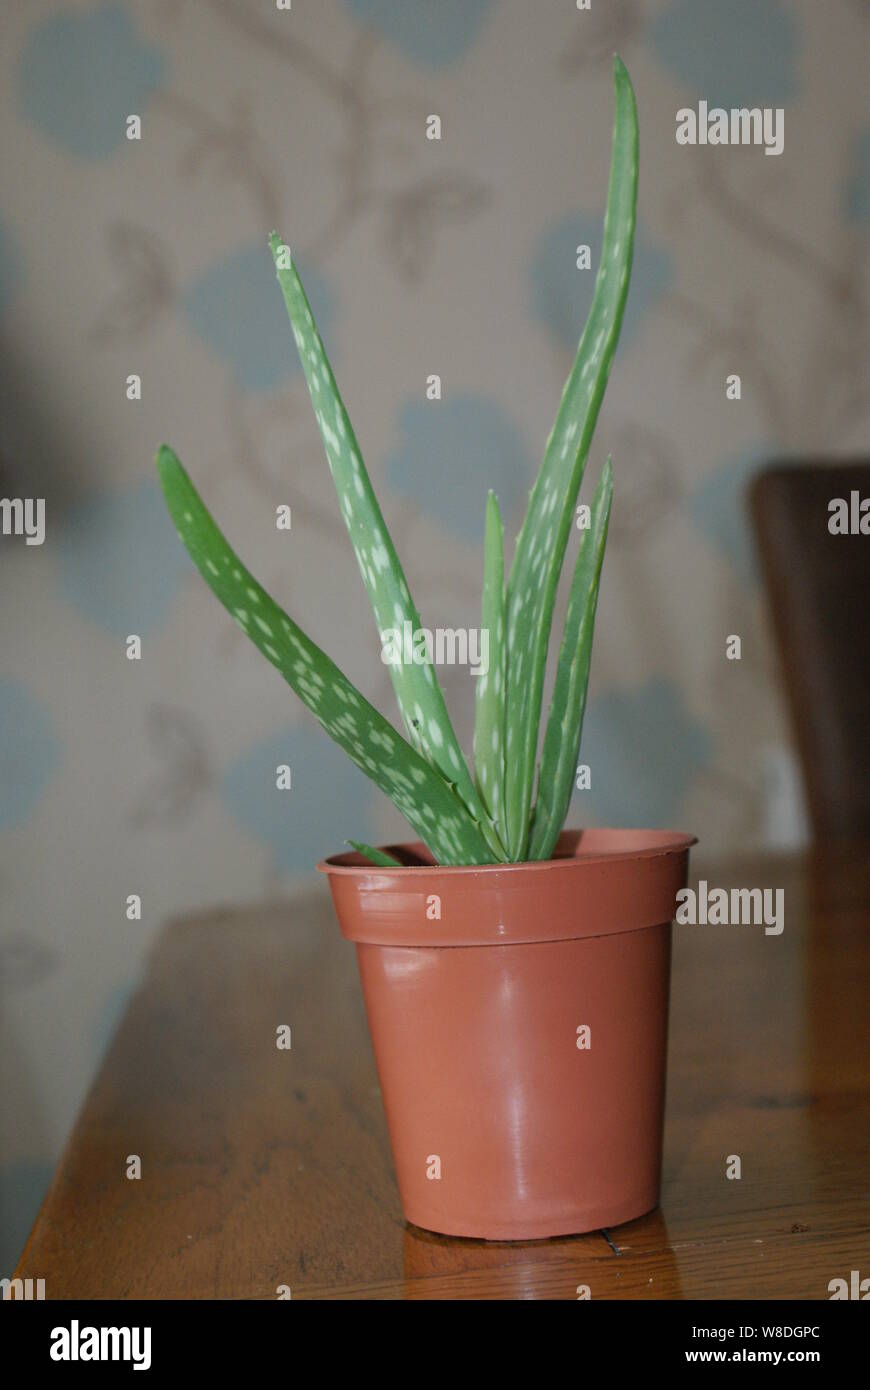 Baby aloe vera plant in a brown plastic pot sitting on a table Stock Photo